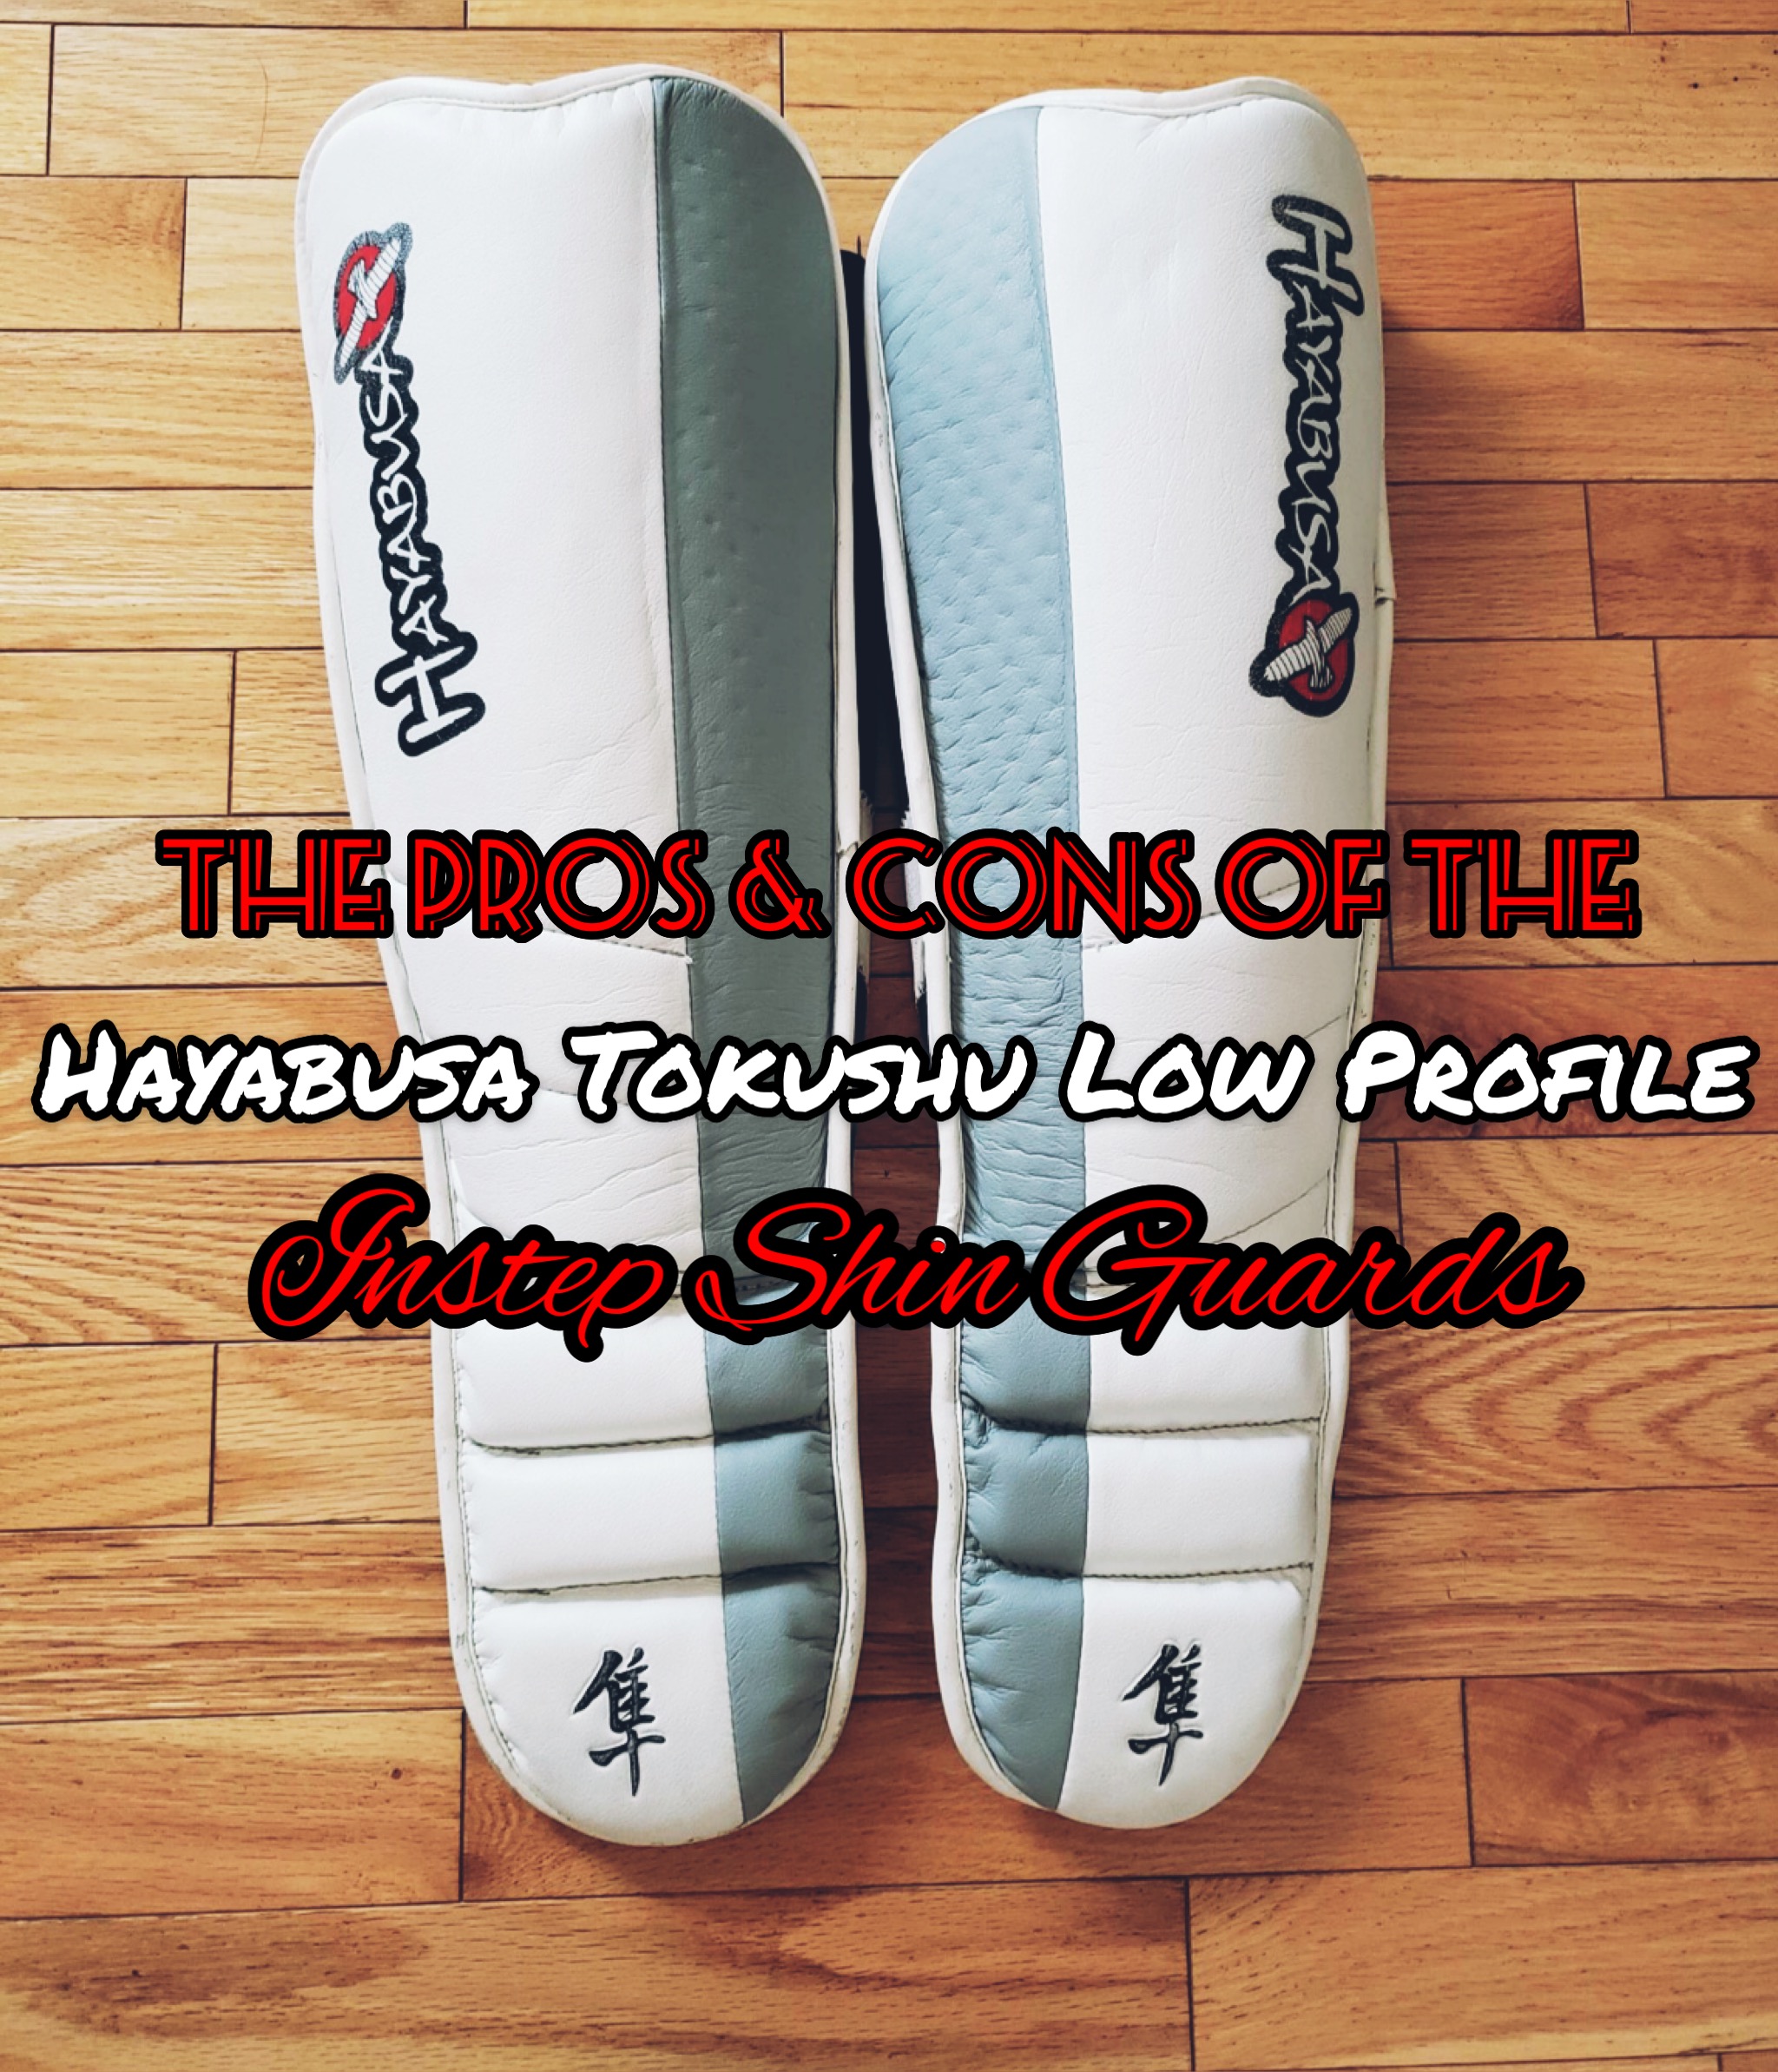 The Pros & Cons of the Hayabusa Tokoshu Low Profile Instep Shin Guards